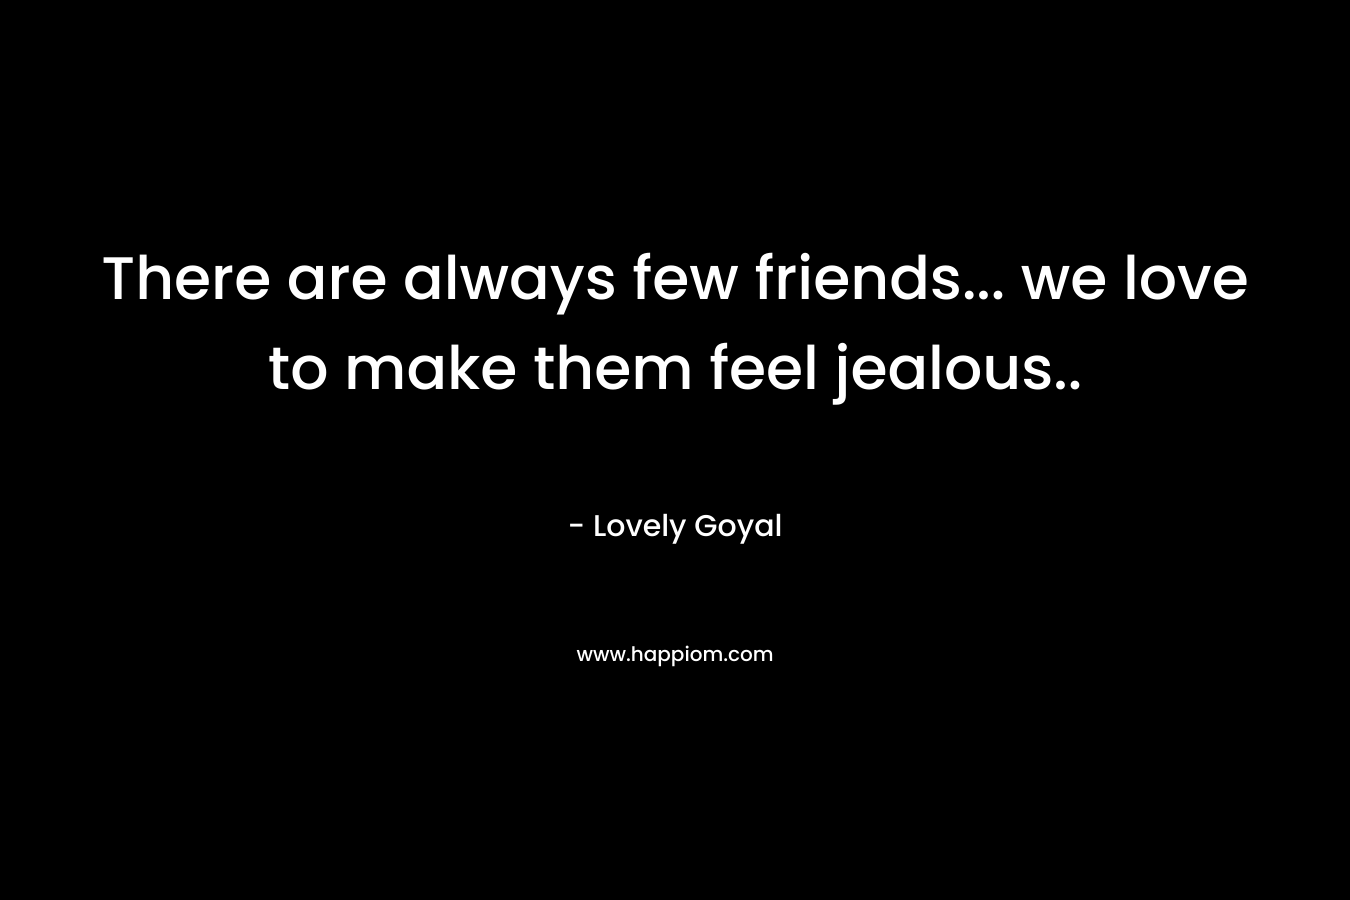 There are always few friends... we love to make them feel jealous..